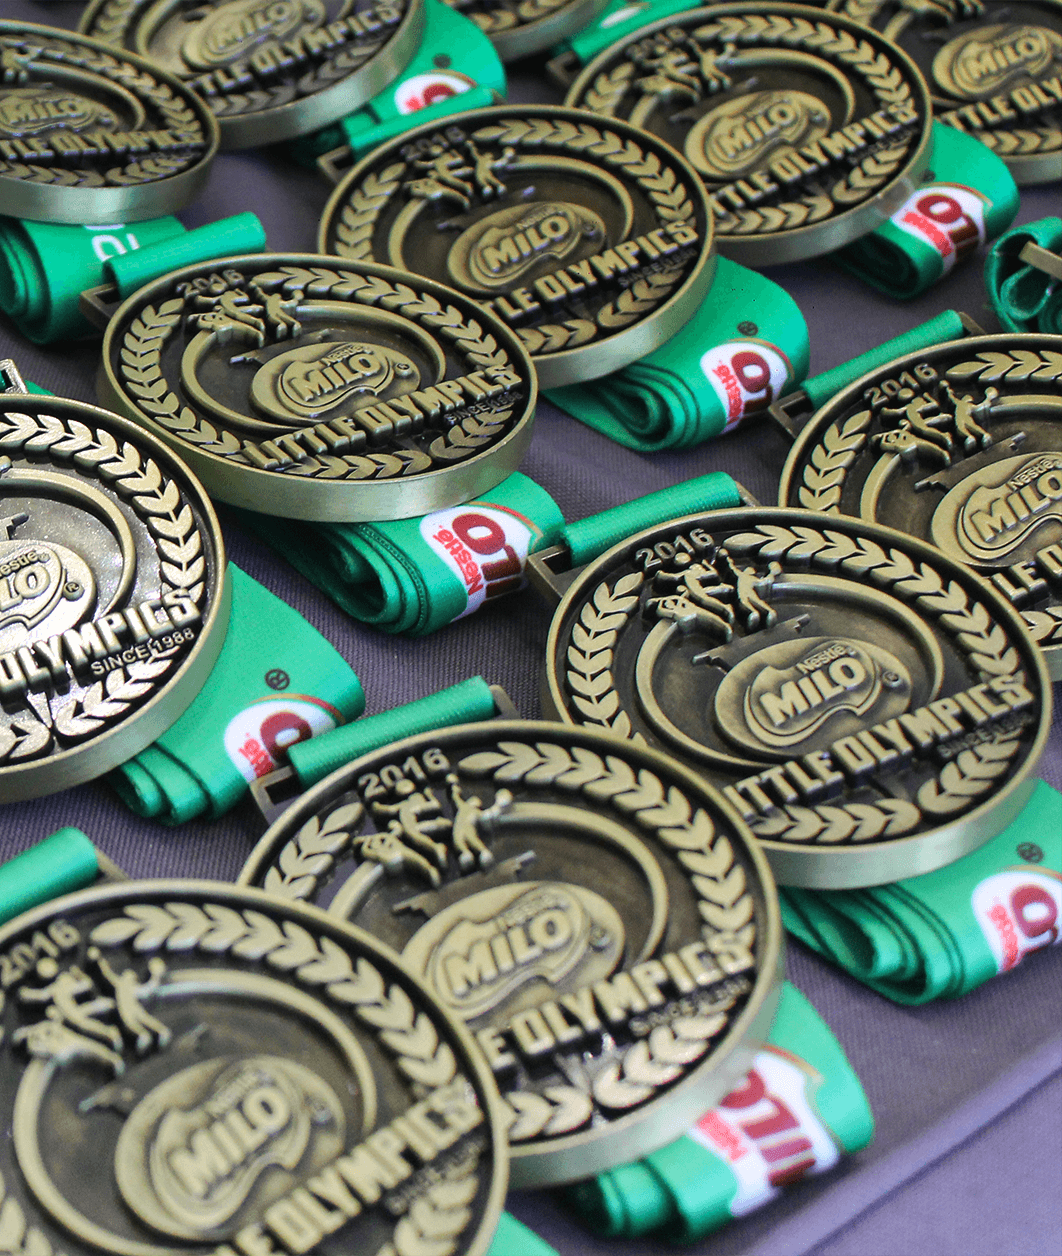 milo little olympics medals teach champions life lessons with milo medals on display